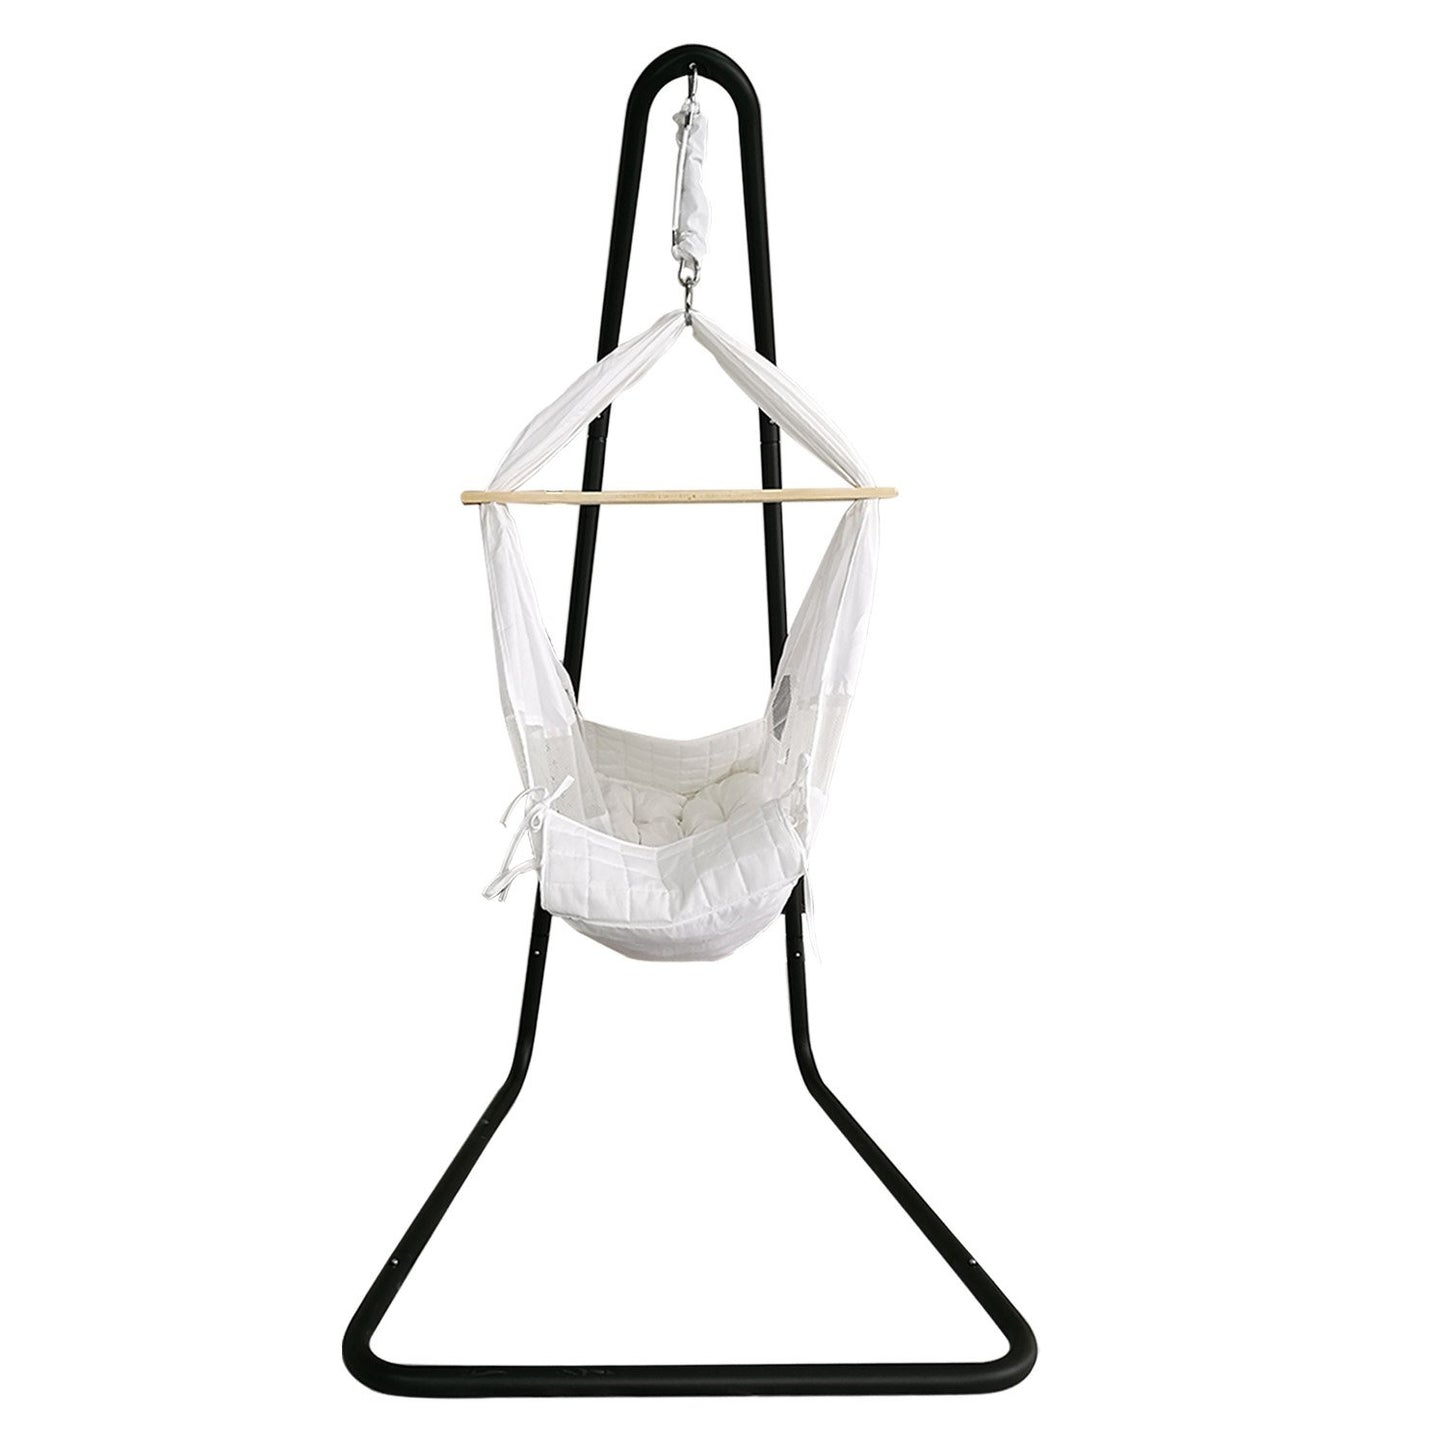 Hammock Cradle Swing with Stand - BHORMS